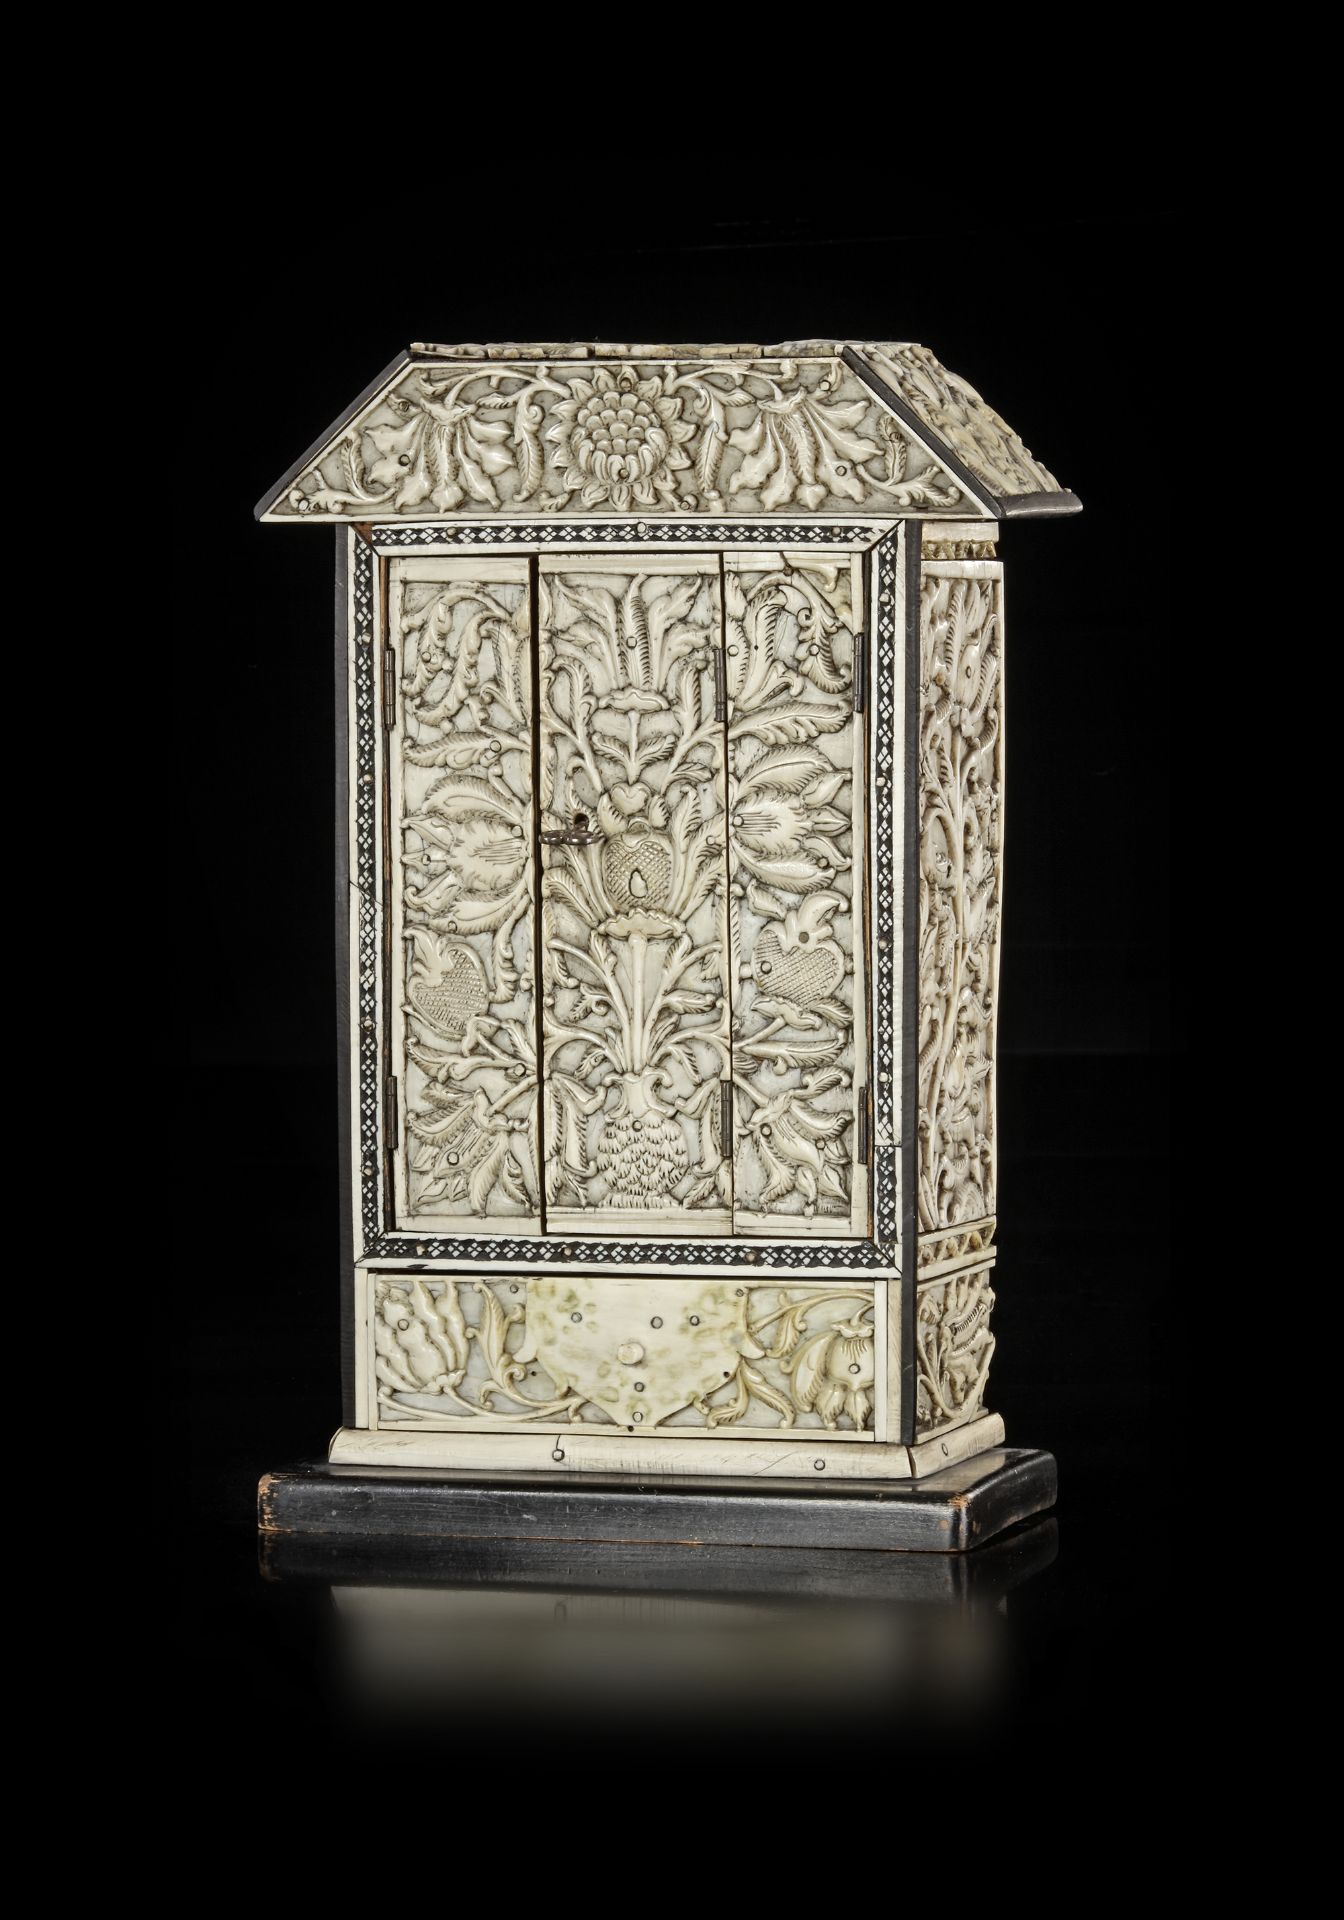 AN IVORY-VENEERED WOODED CABINET, SRI LANKA OR INDIA, LATE 17TH CENTURY - Image 2 of 6